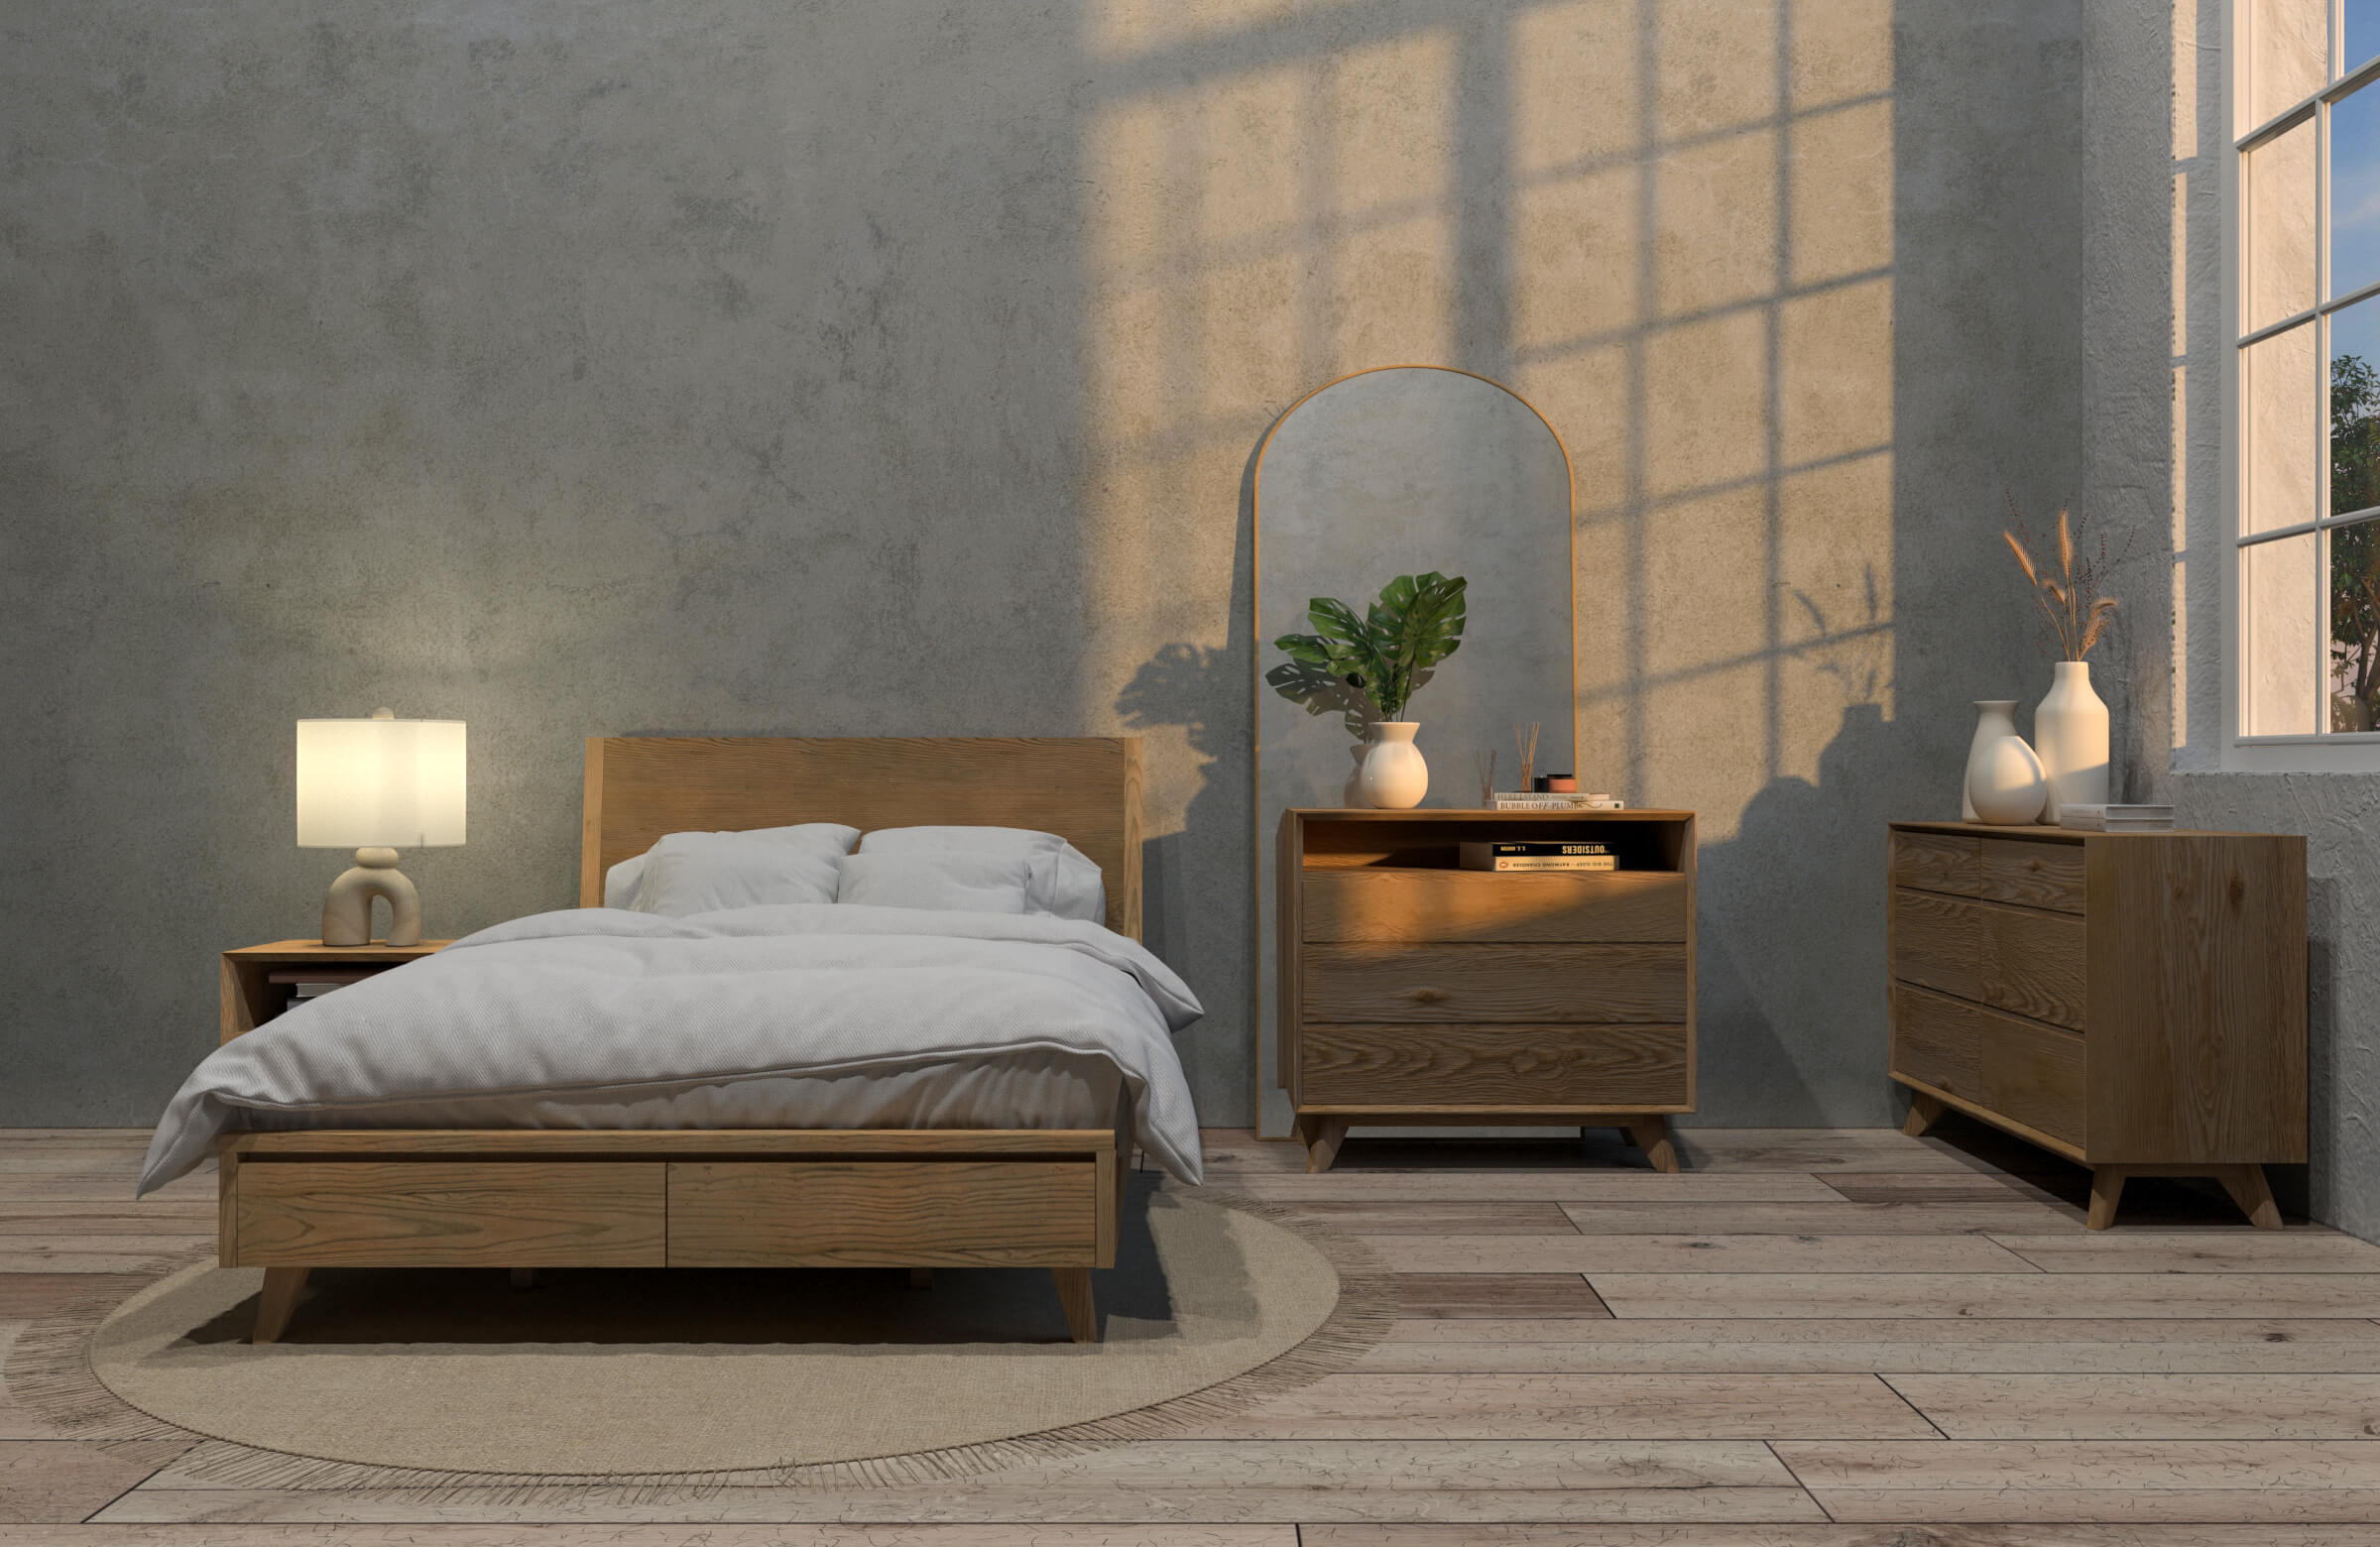 Mim Concept best Modern furniture stores in Toronto, Ottawa and Mississauga to sell modern contemporary bedroom furniture and condo furniture. Minimal mid century modern bed Low profile platform storage bed solid walnut wood modern organic